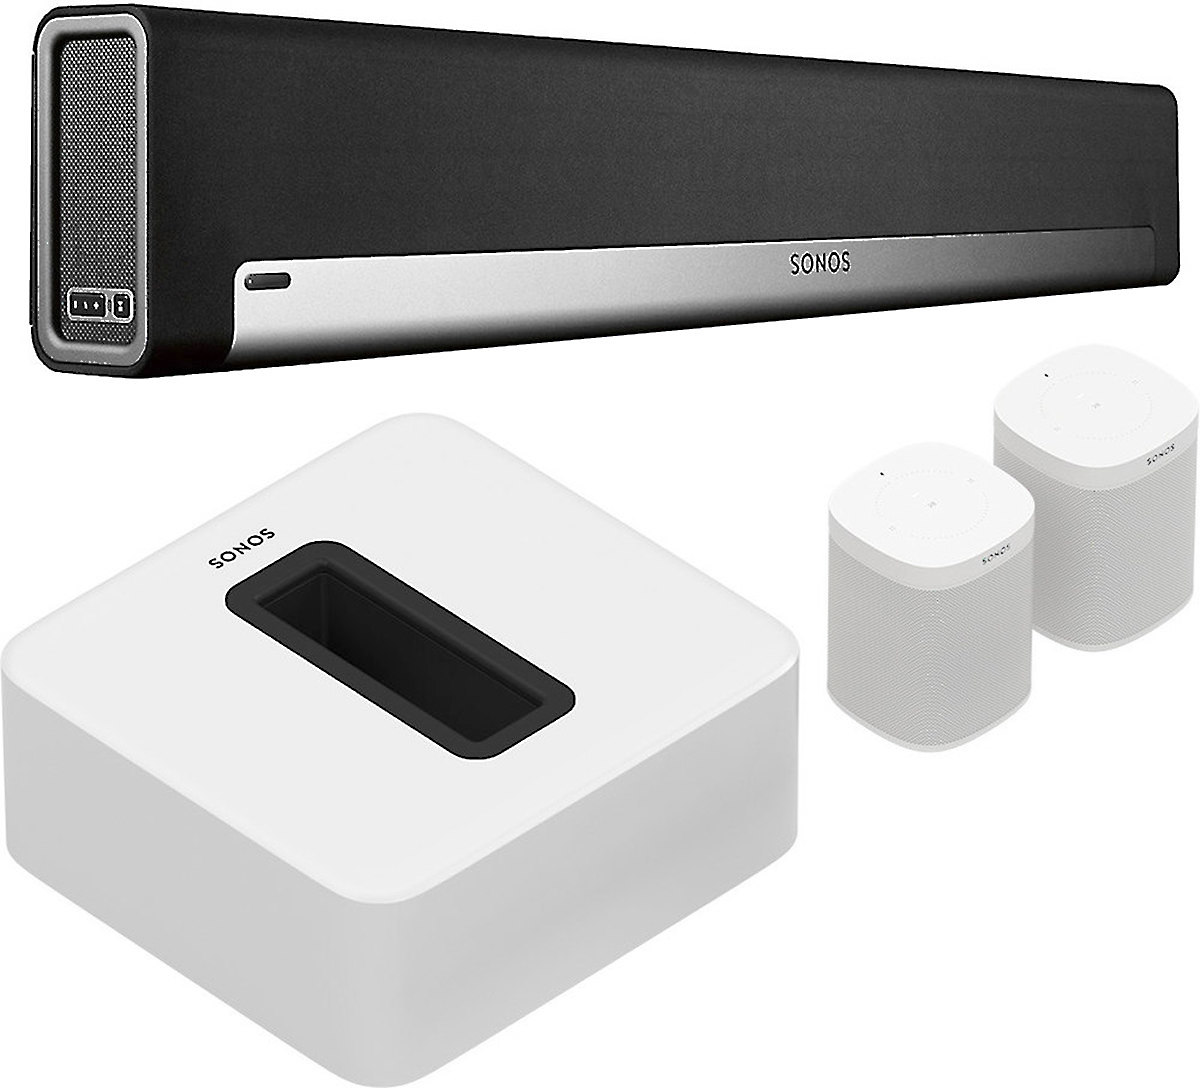 Sonos Playbar 5.1 Home Theater System 